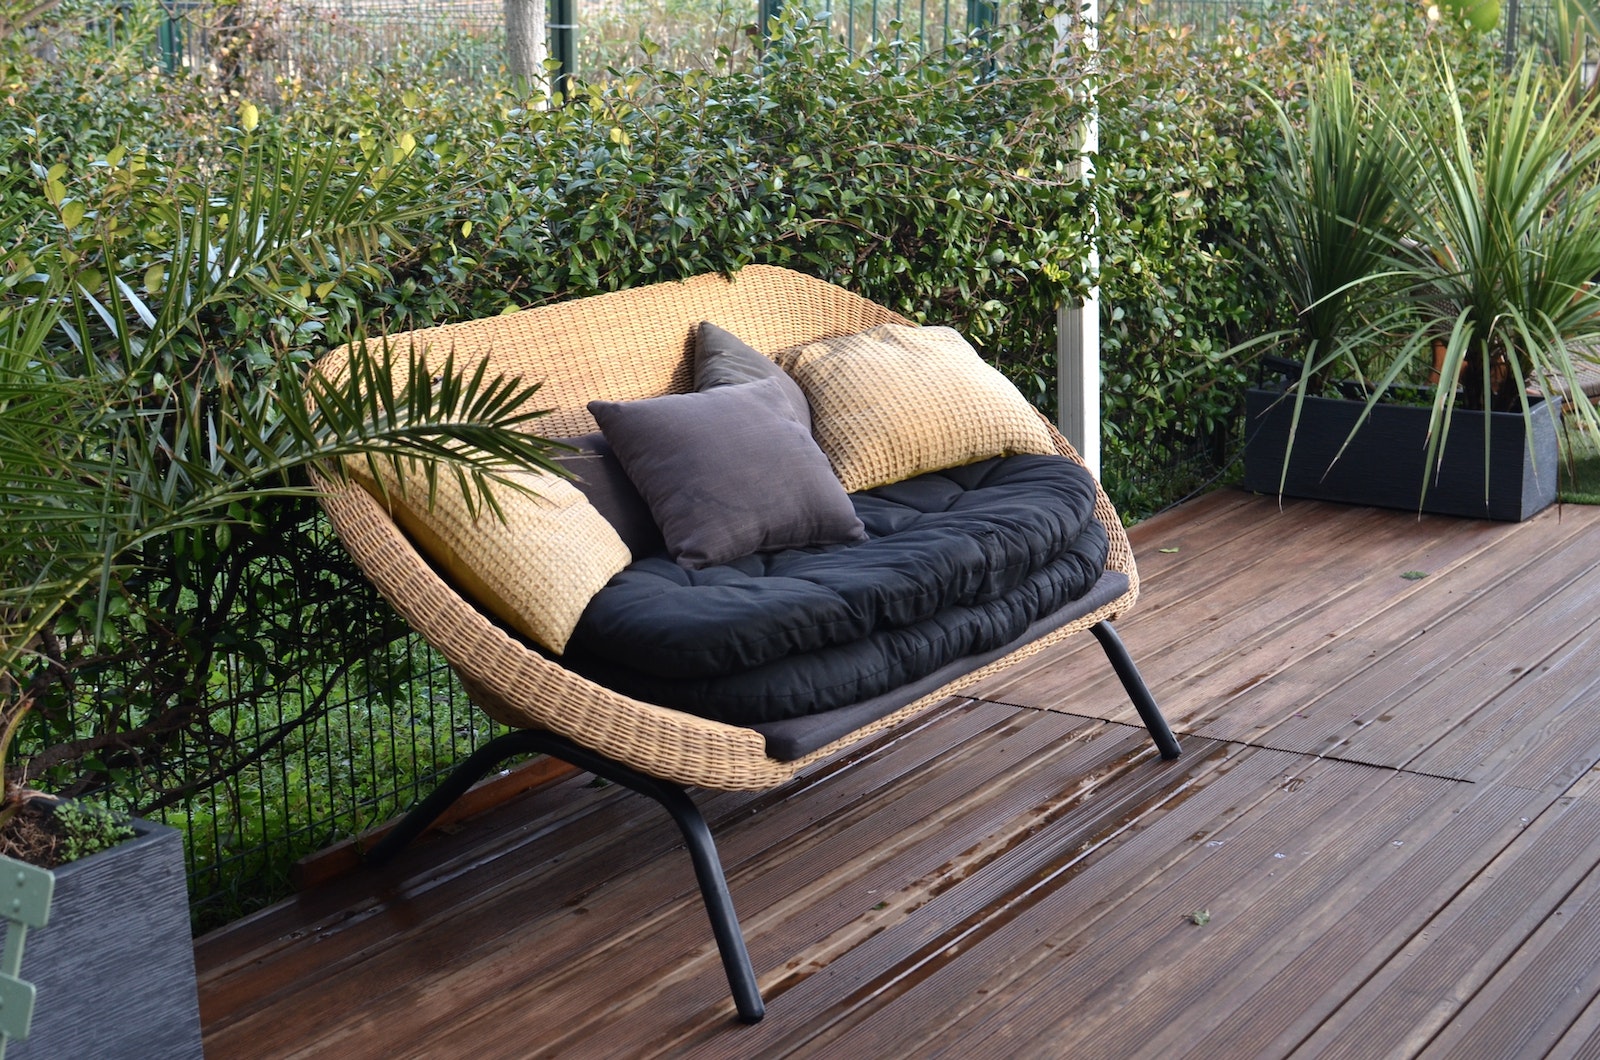 How much does outdoor furniture cost